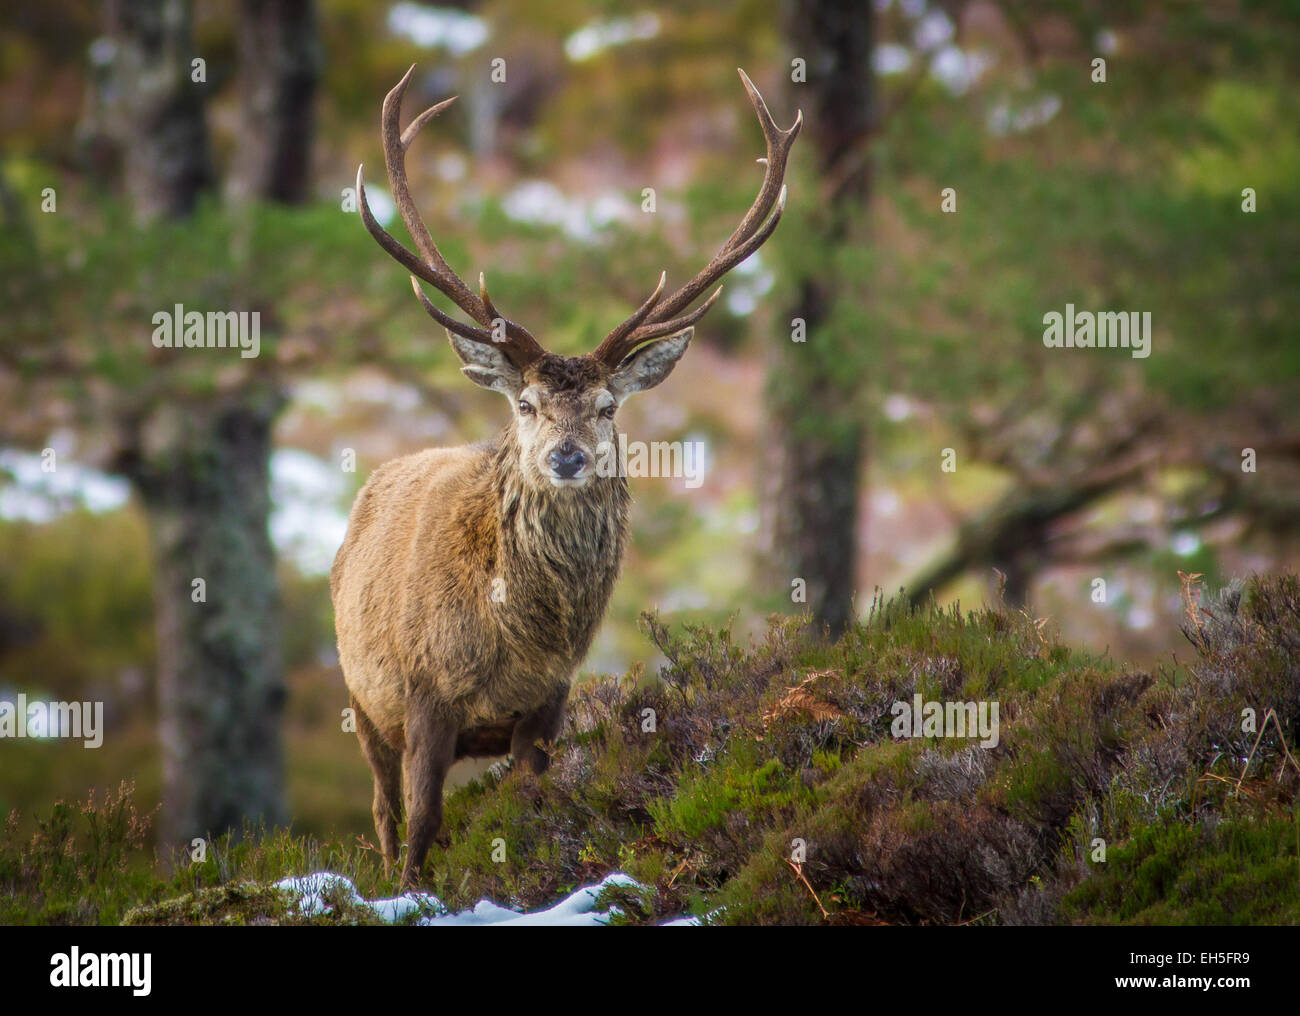 Wild Red deer Stag in a forest, Glen cannich, Scotland Stock Photo